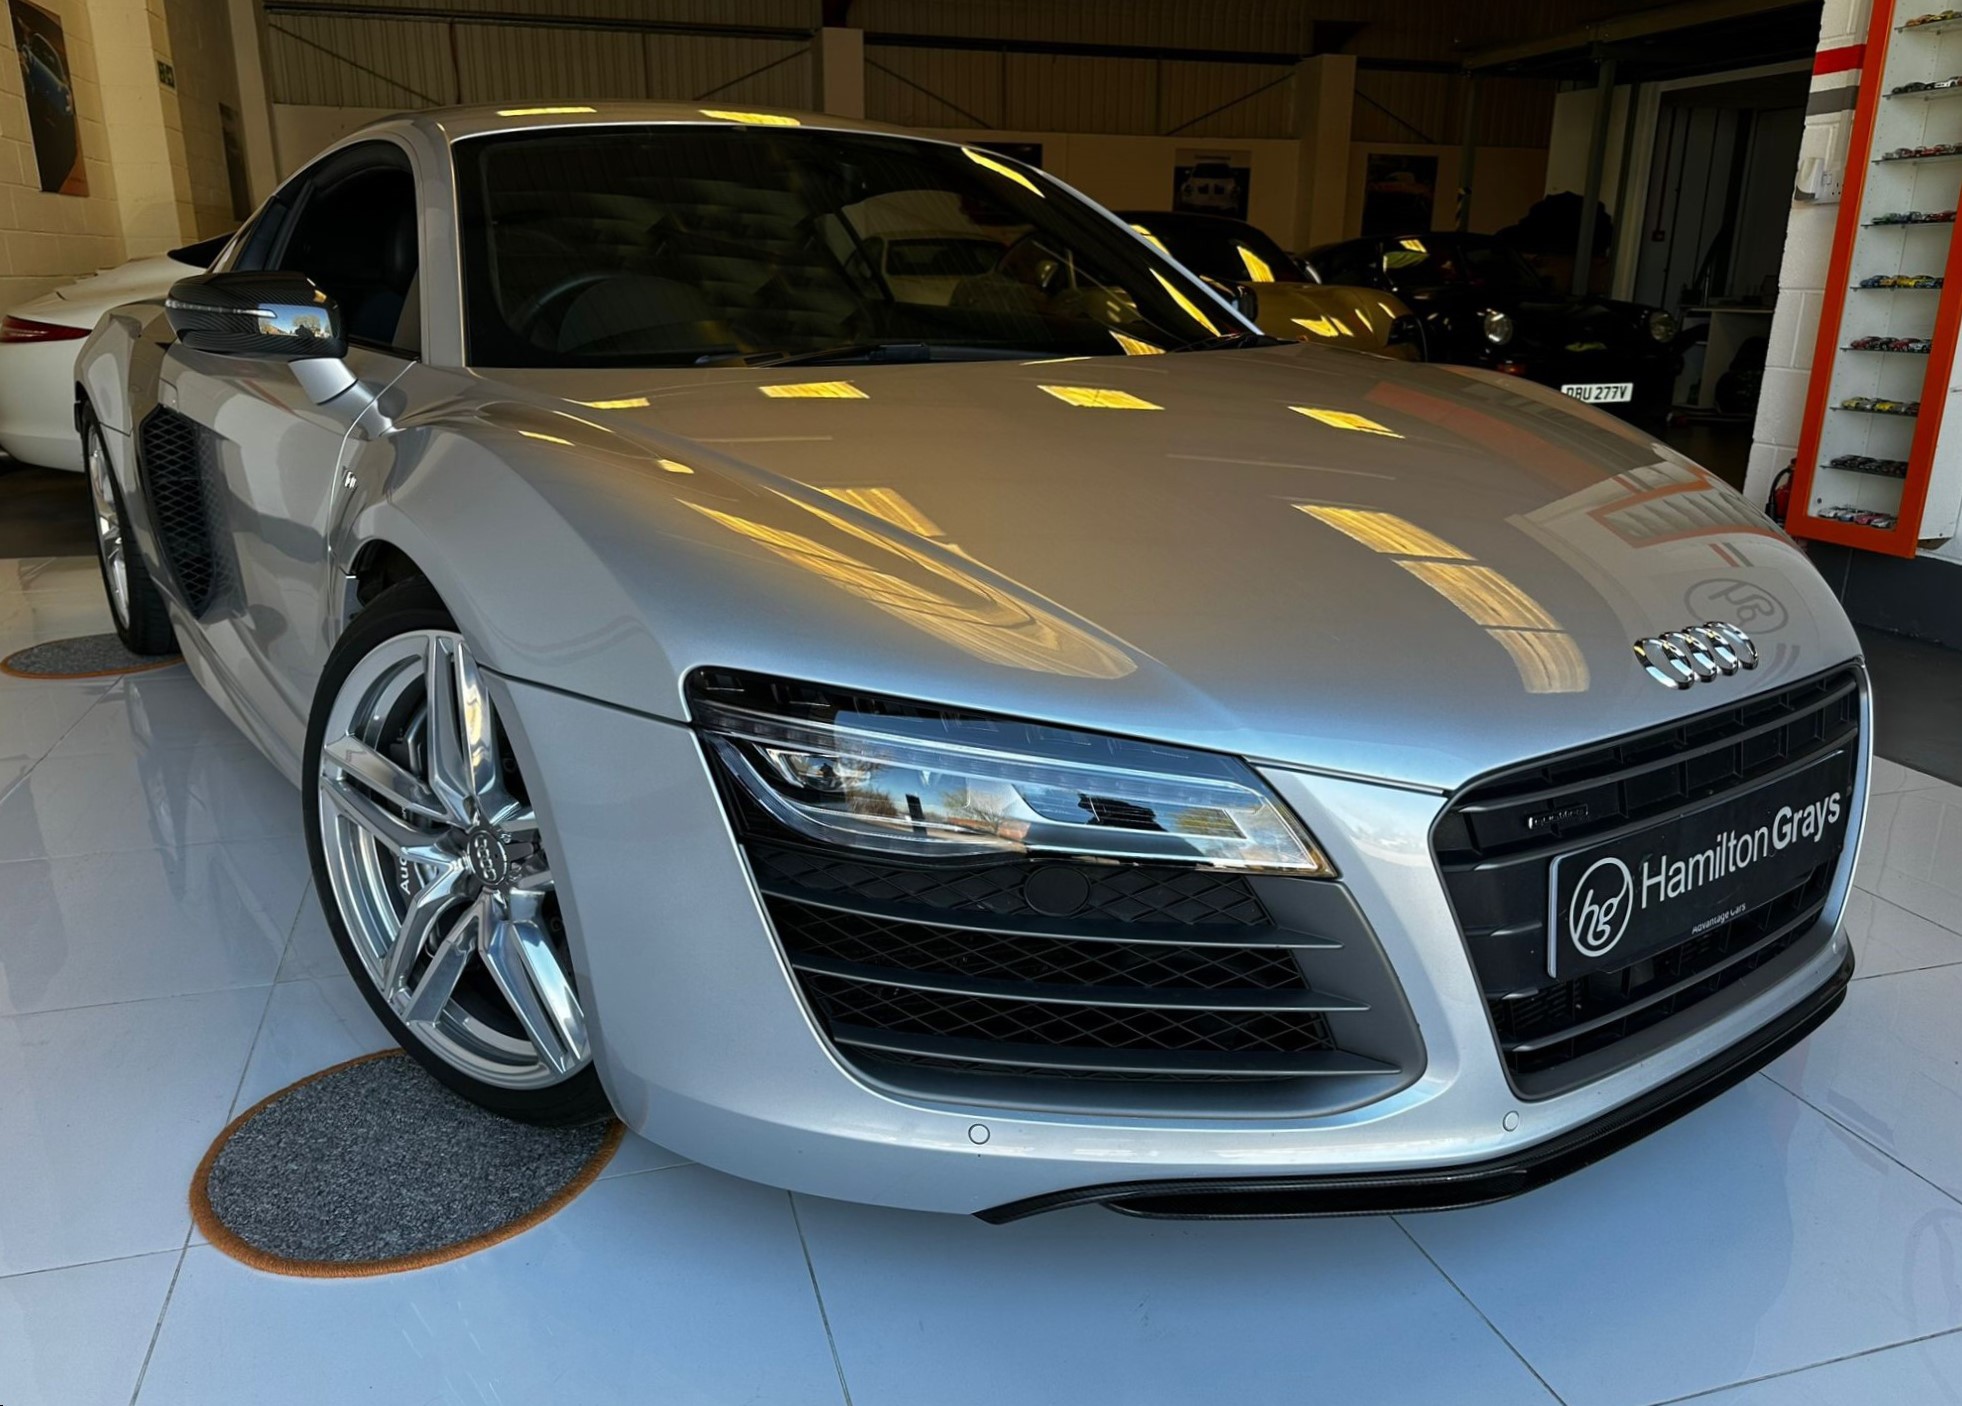 2014 (14) Audi R8 5.2 FSI V10 ‘Plus’ STronic quattro. Finished in Ice Silver with Full Black Nappa Leather. FASH. Only 12k! Serviced 5/4. Extensive Specification. Find Another.. £64,950